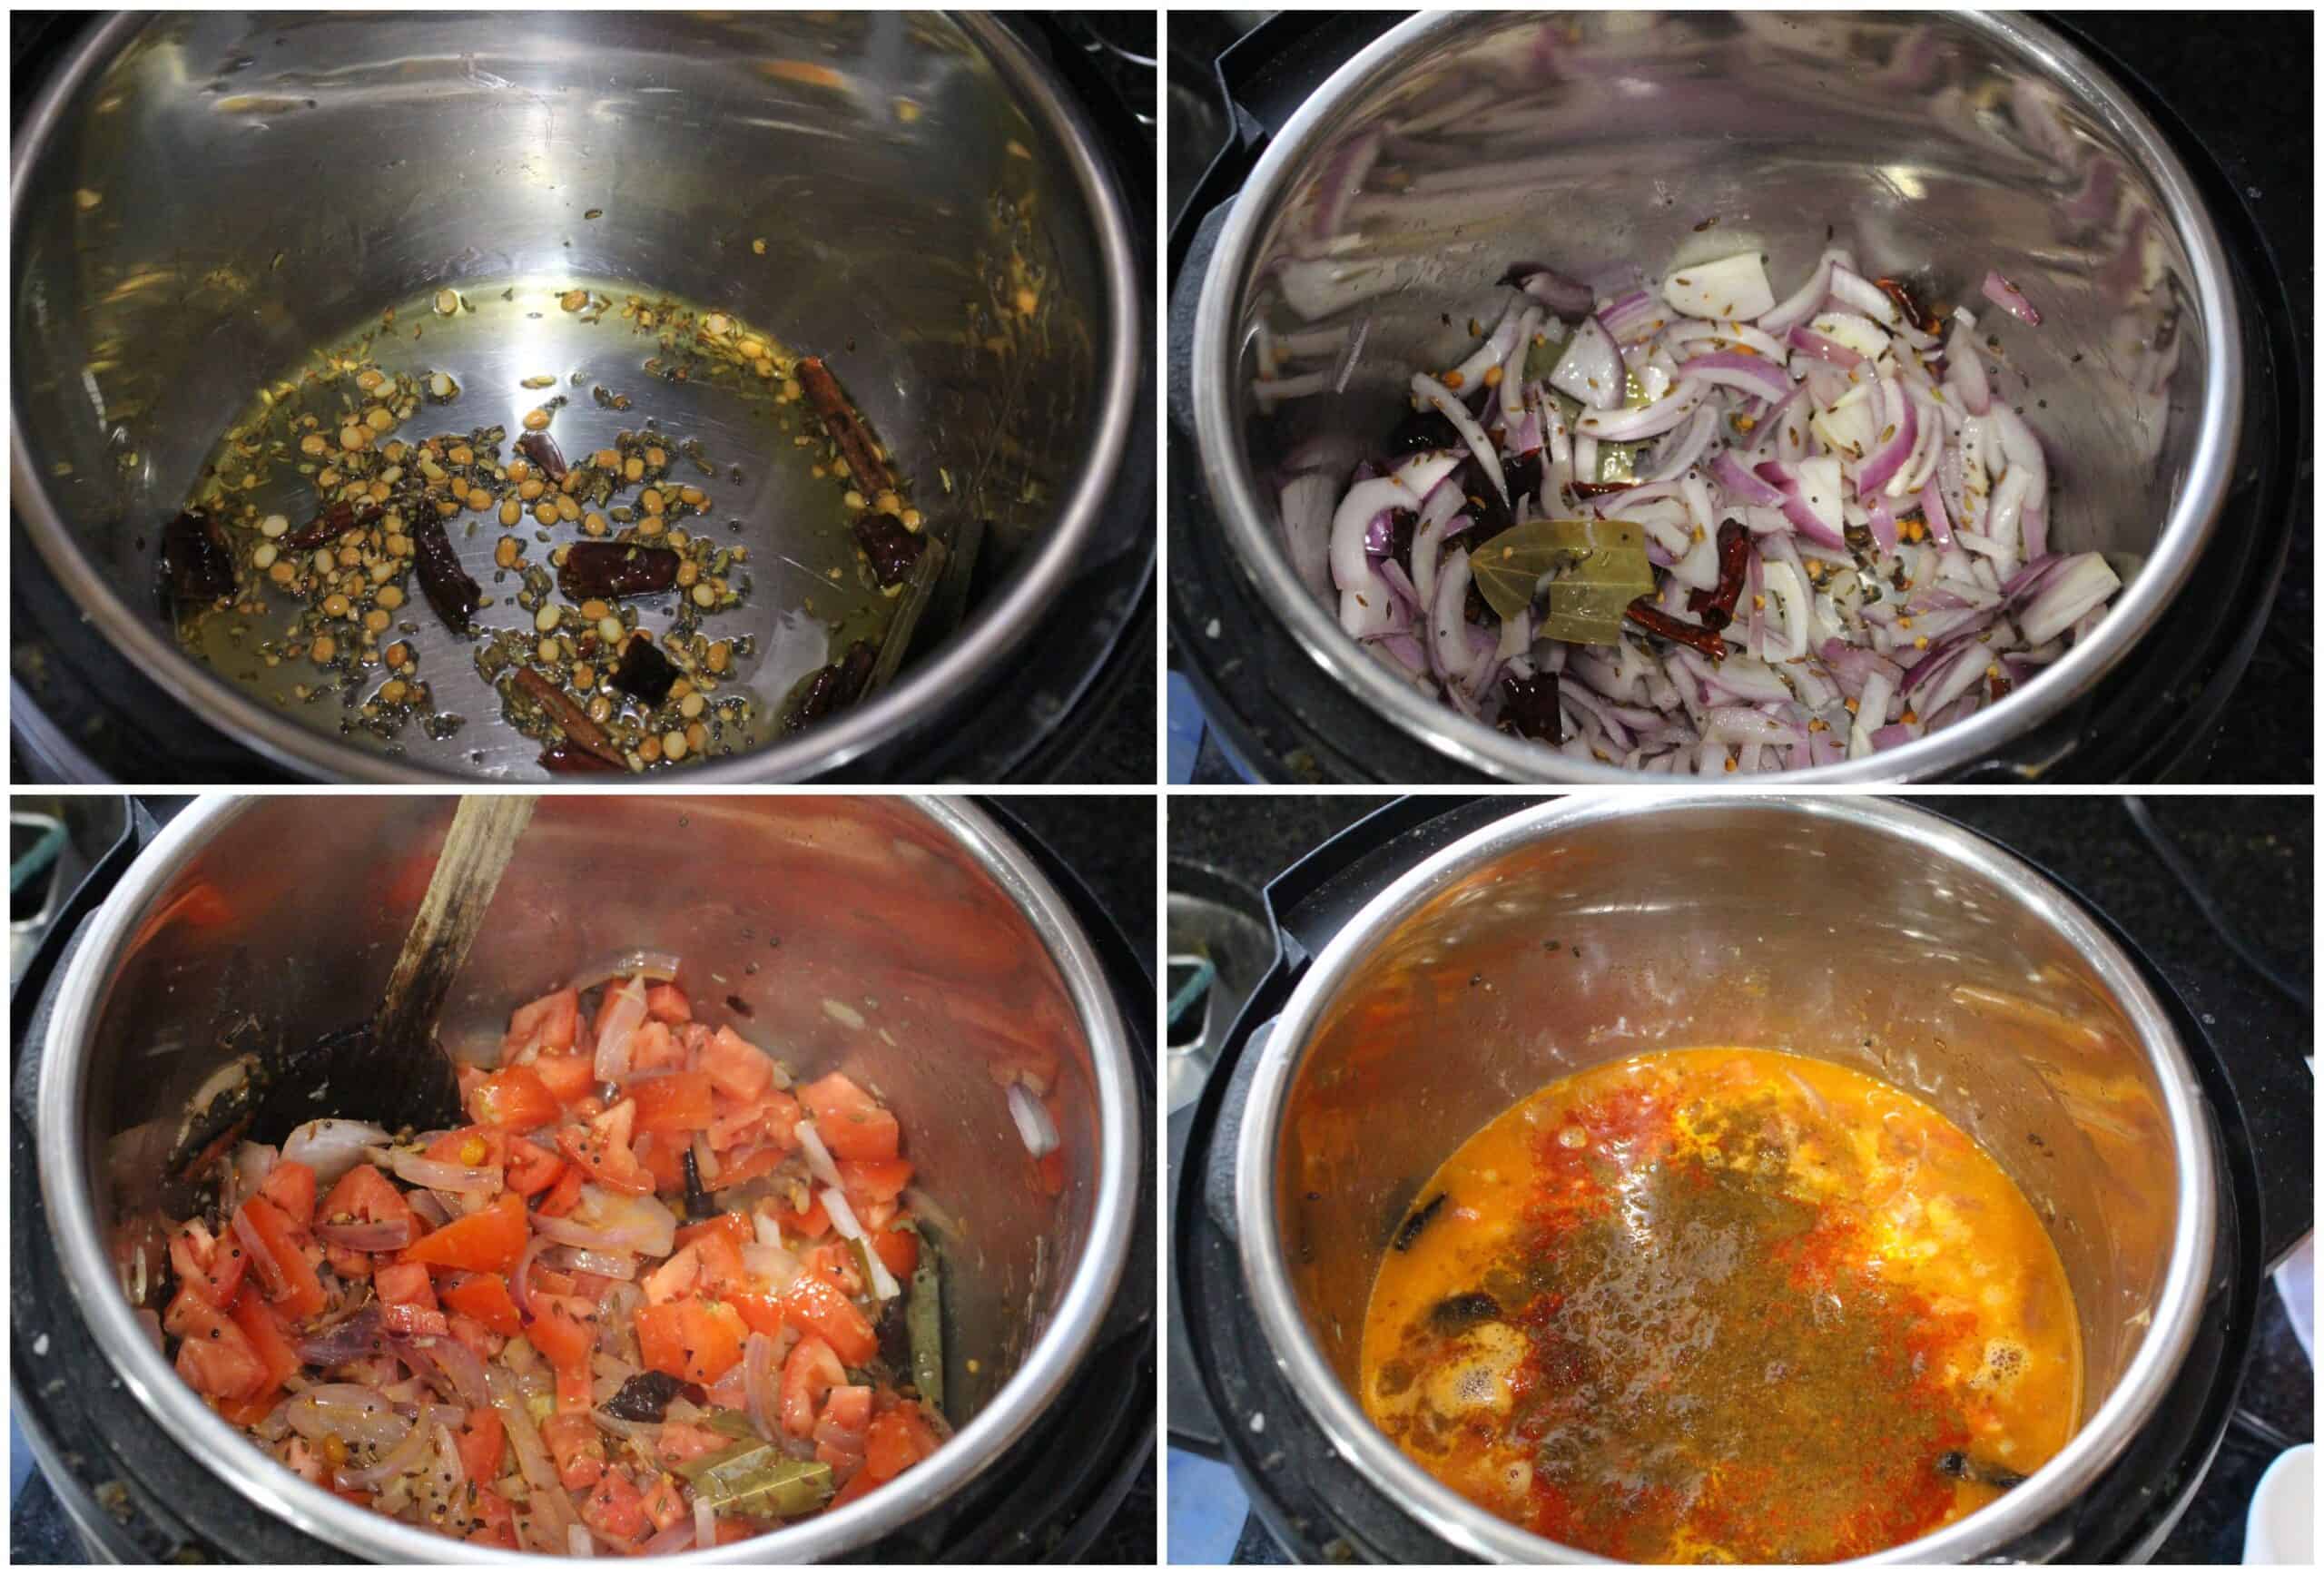 Process shots to saute ingredients and then add tomatoes